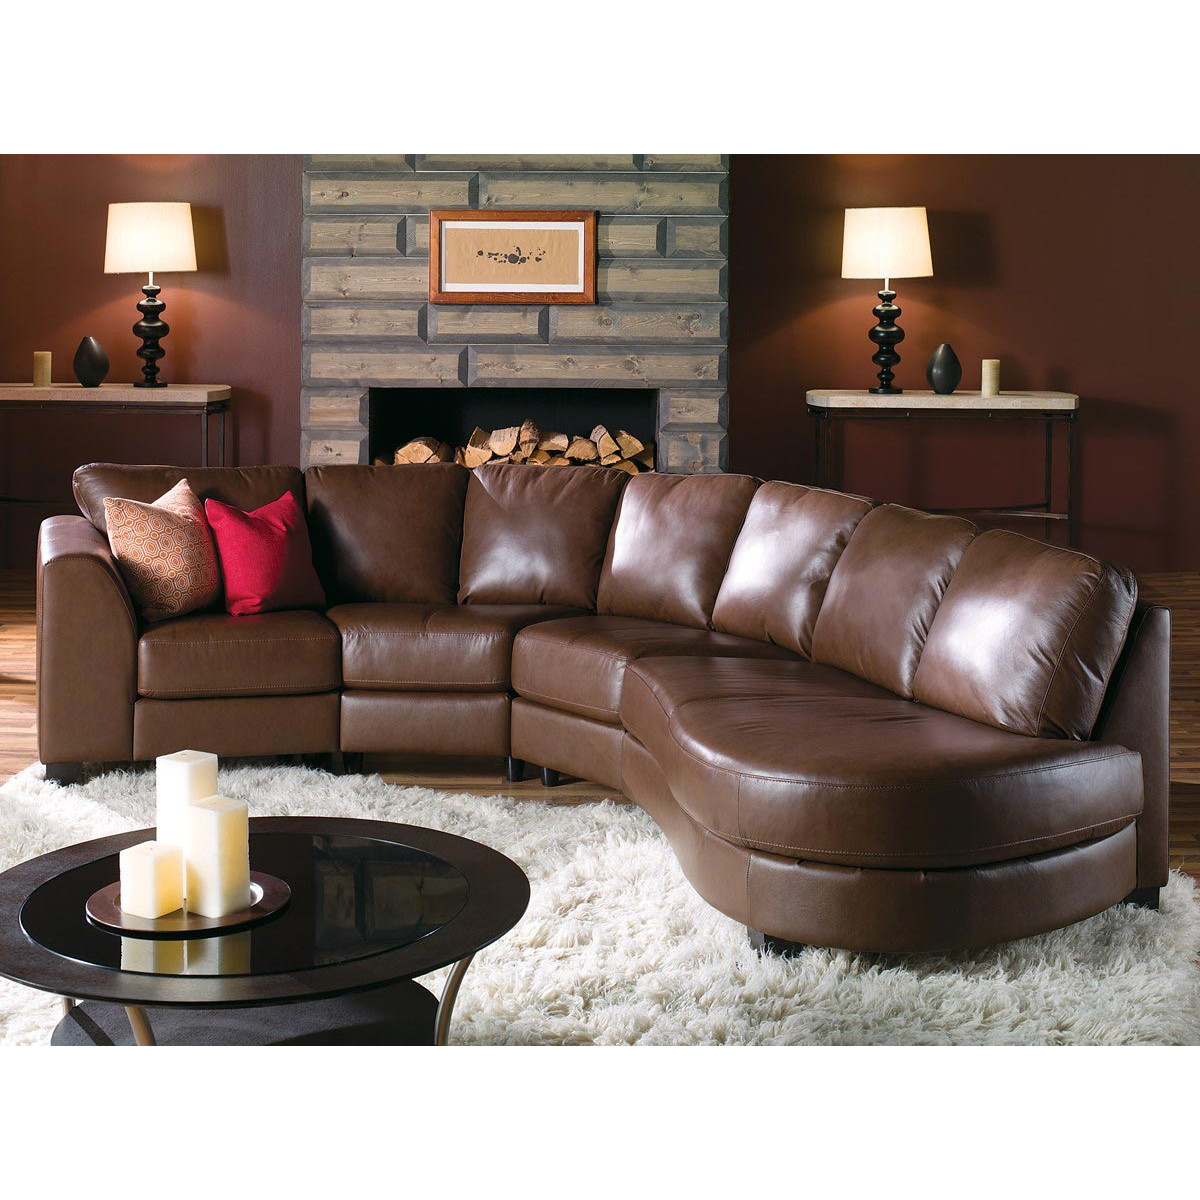 Palliser Juno Sofa From 1 269 00 By, Palliser Leather Sectional Reviews